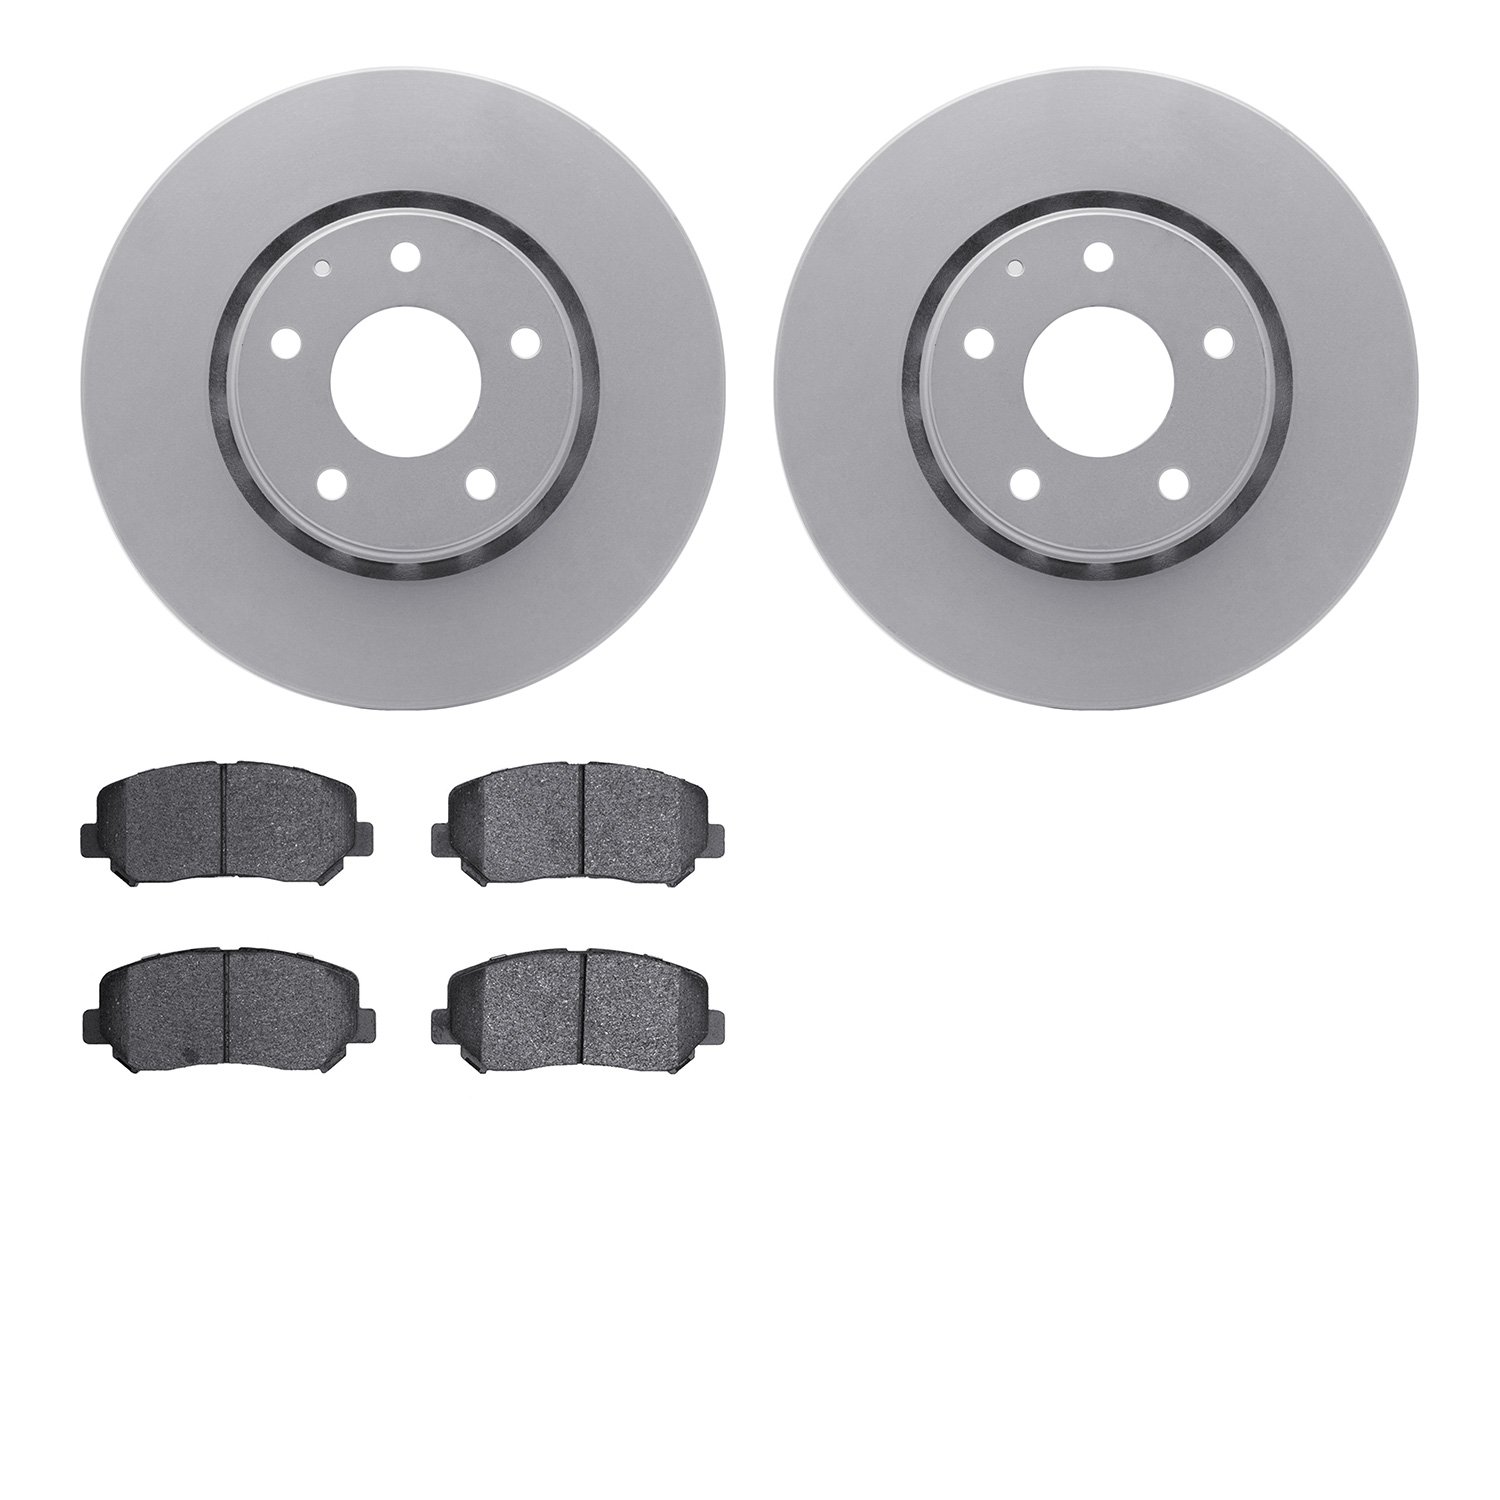 4302-80033 Geospec Brake Rotors with 3000-Series Ceramic Brake Pads Kit, Fits Select Ford/Lincoln/Mercury/Mazda, Position: Front